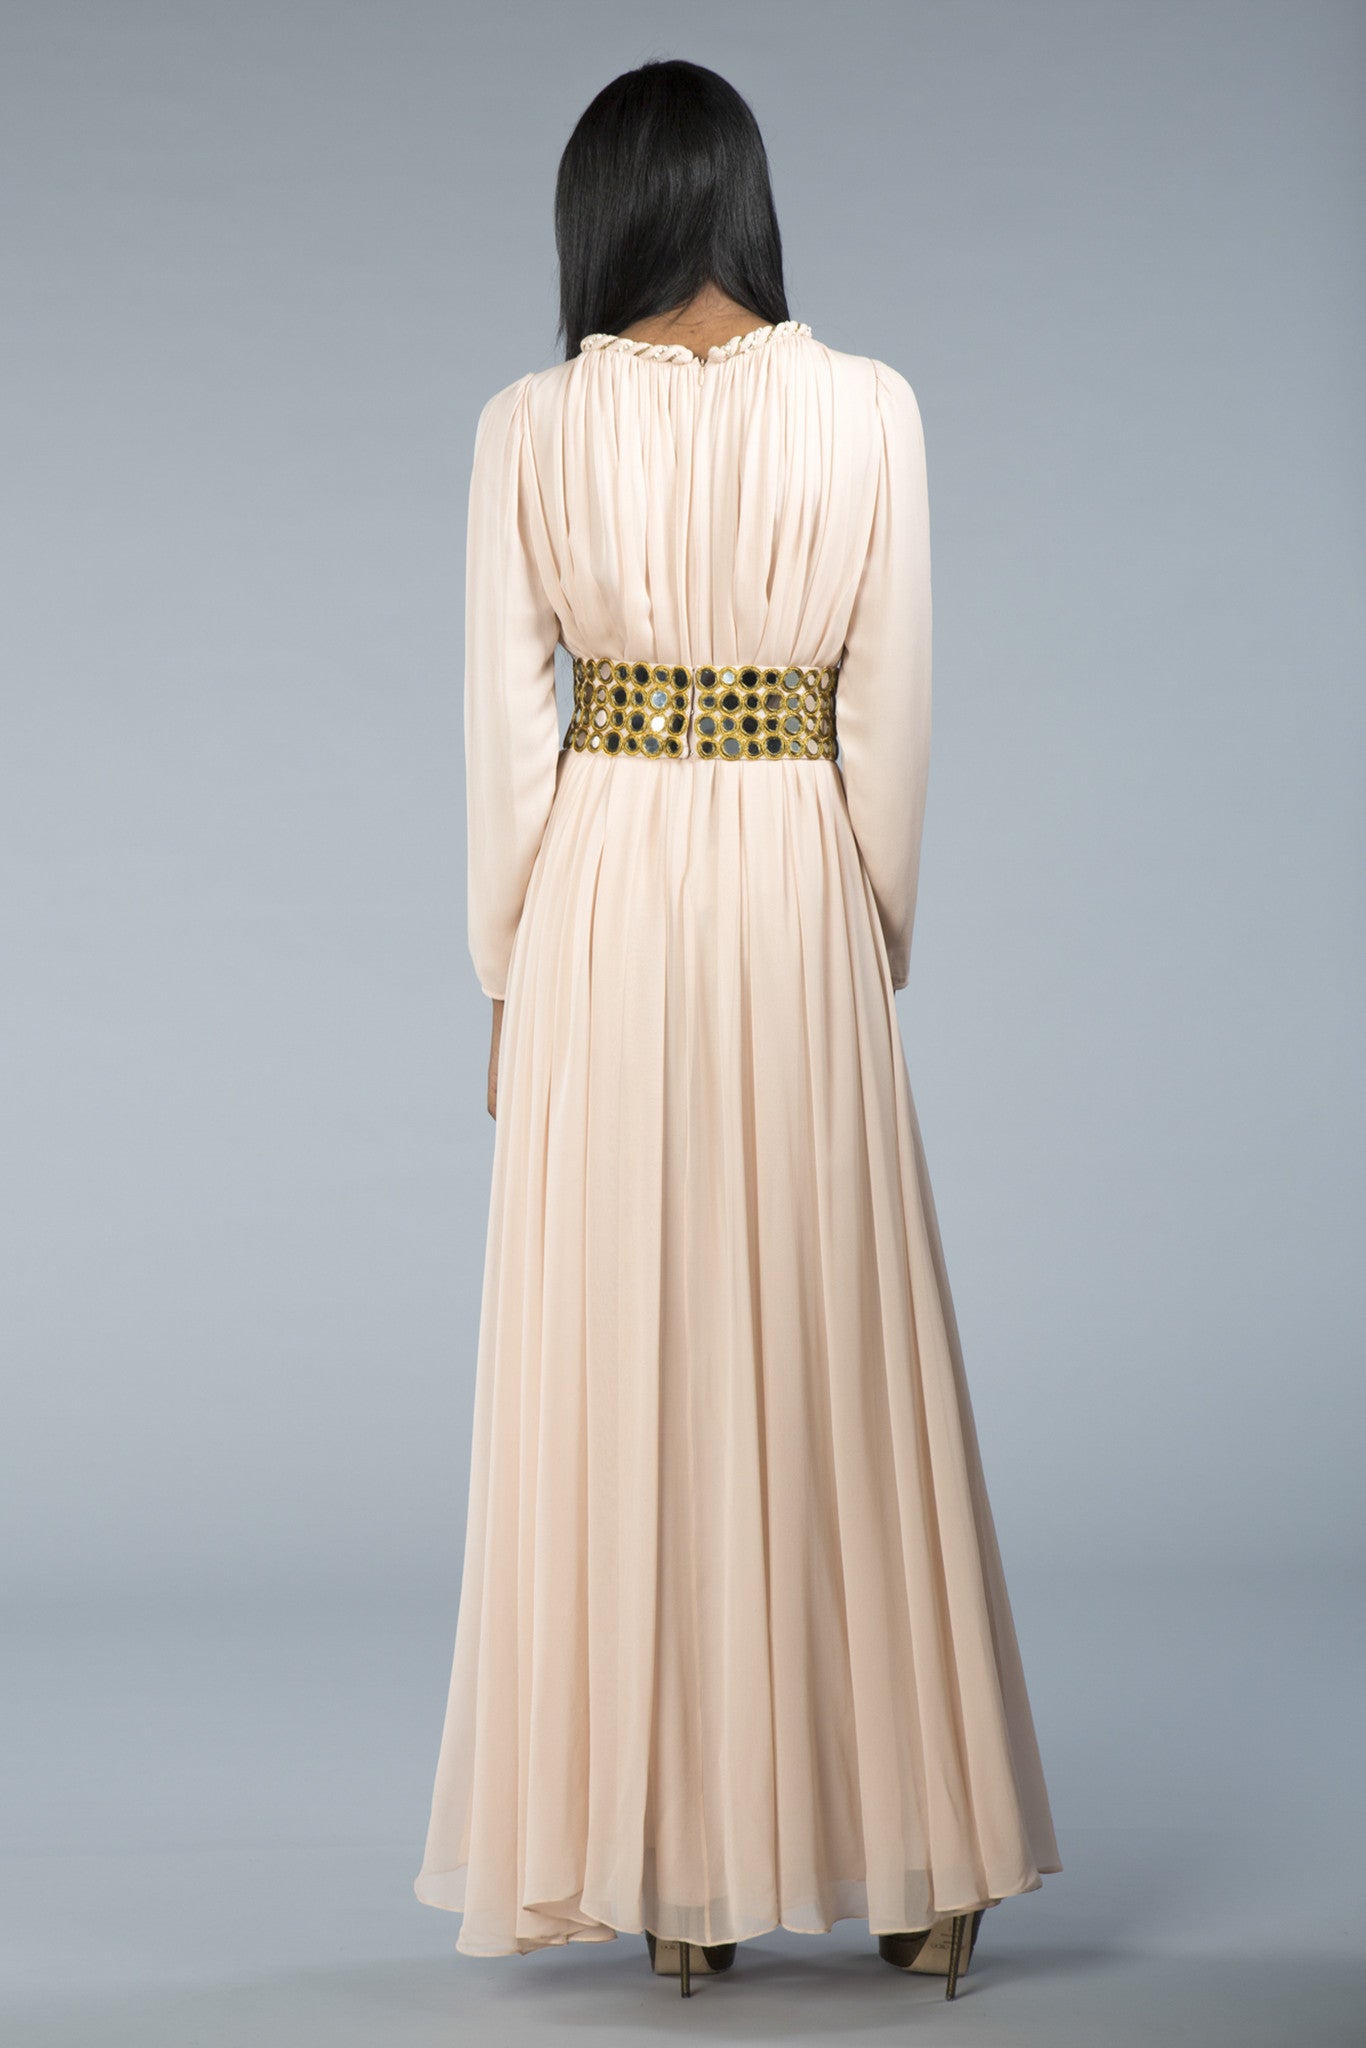 Light flowing gown, slit sleeves, embellished neck and belt with glass